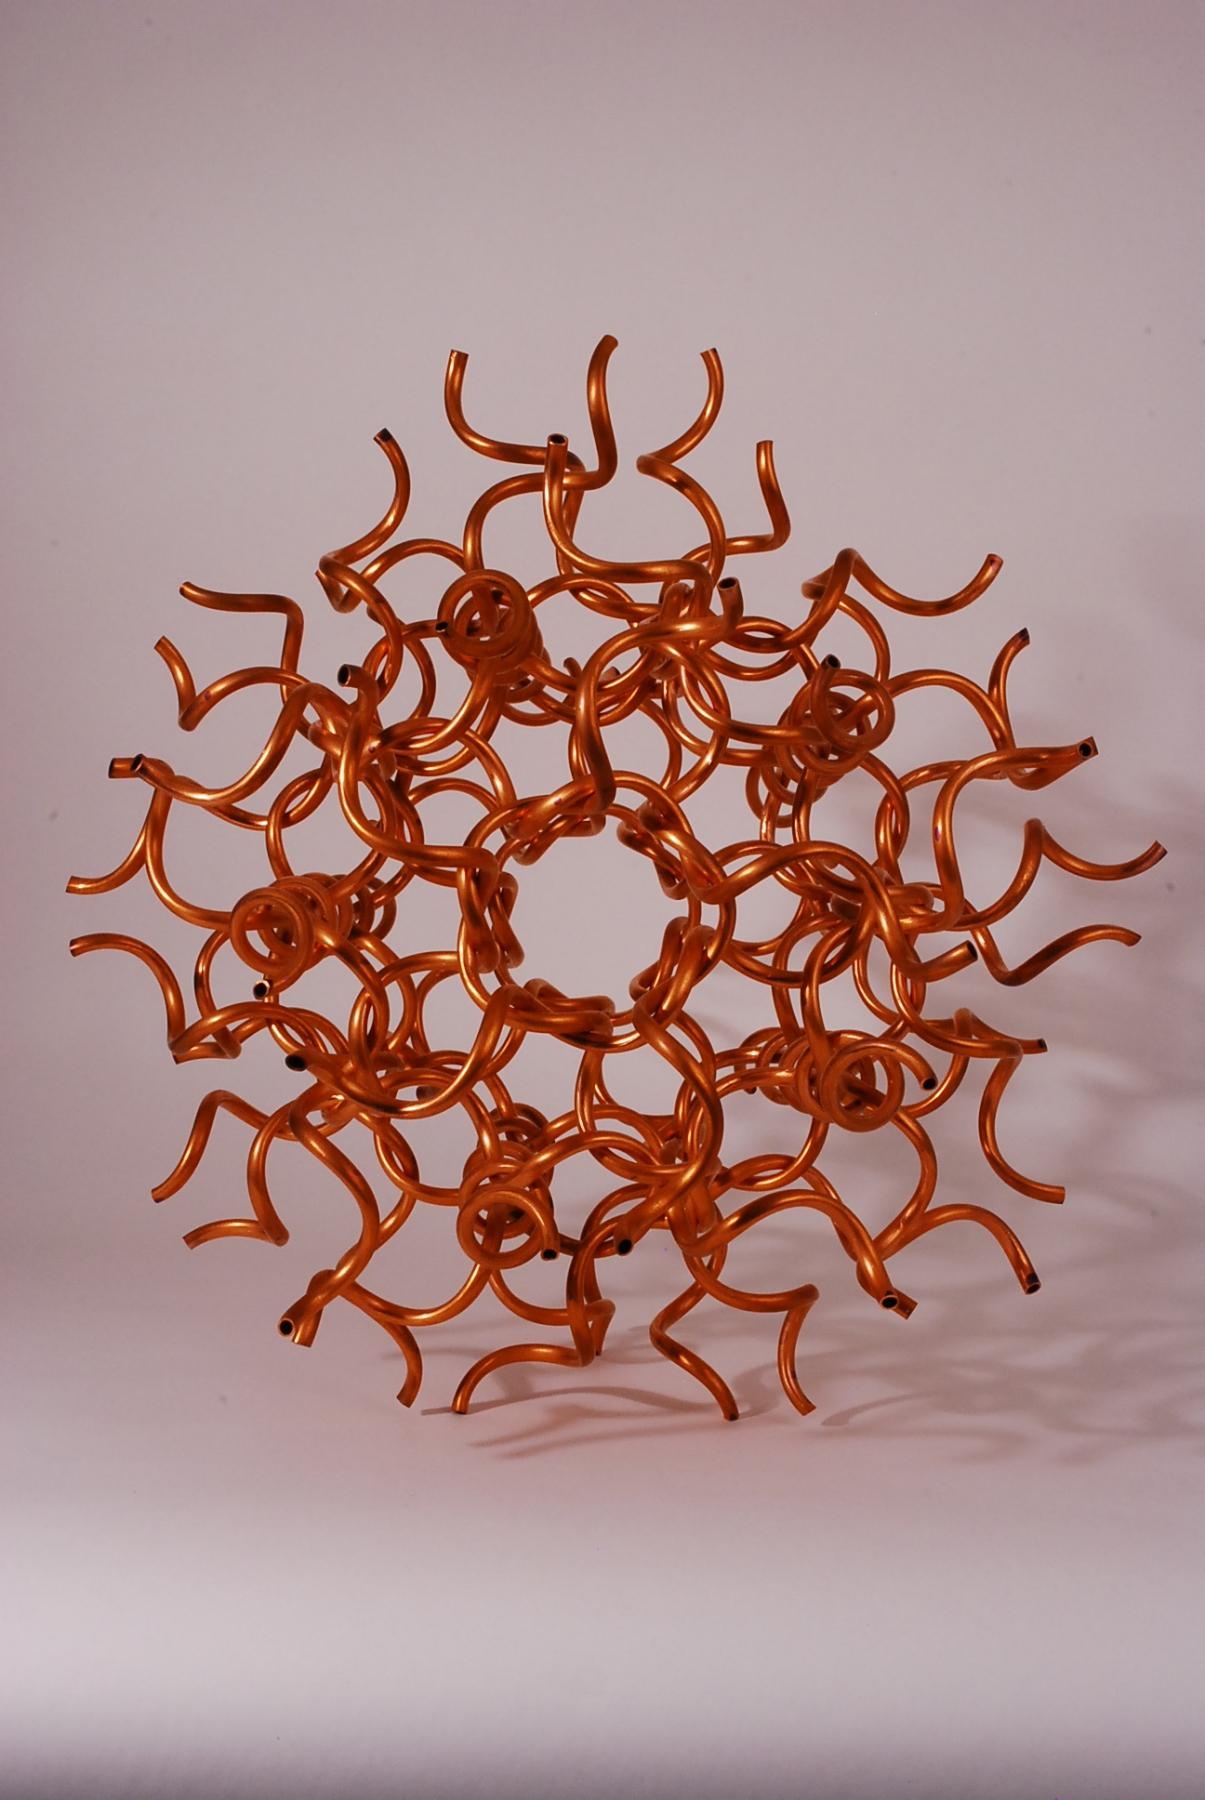 Image for entry 'A WOVEN ICOSIDODECAHEDRON'